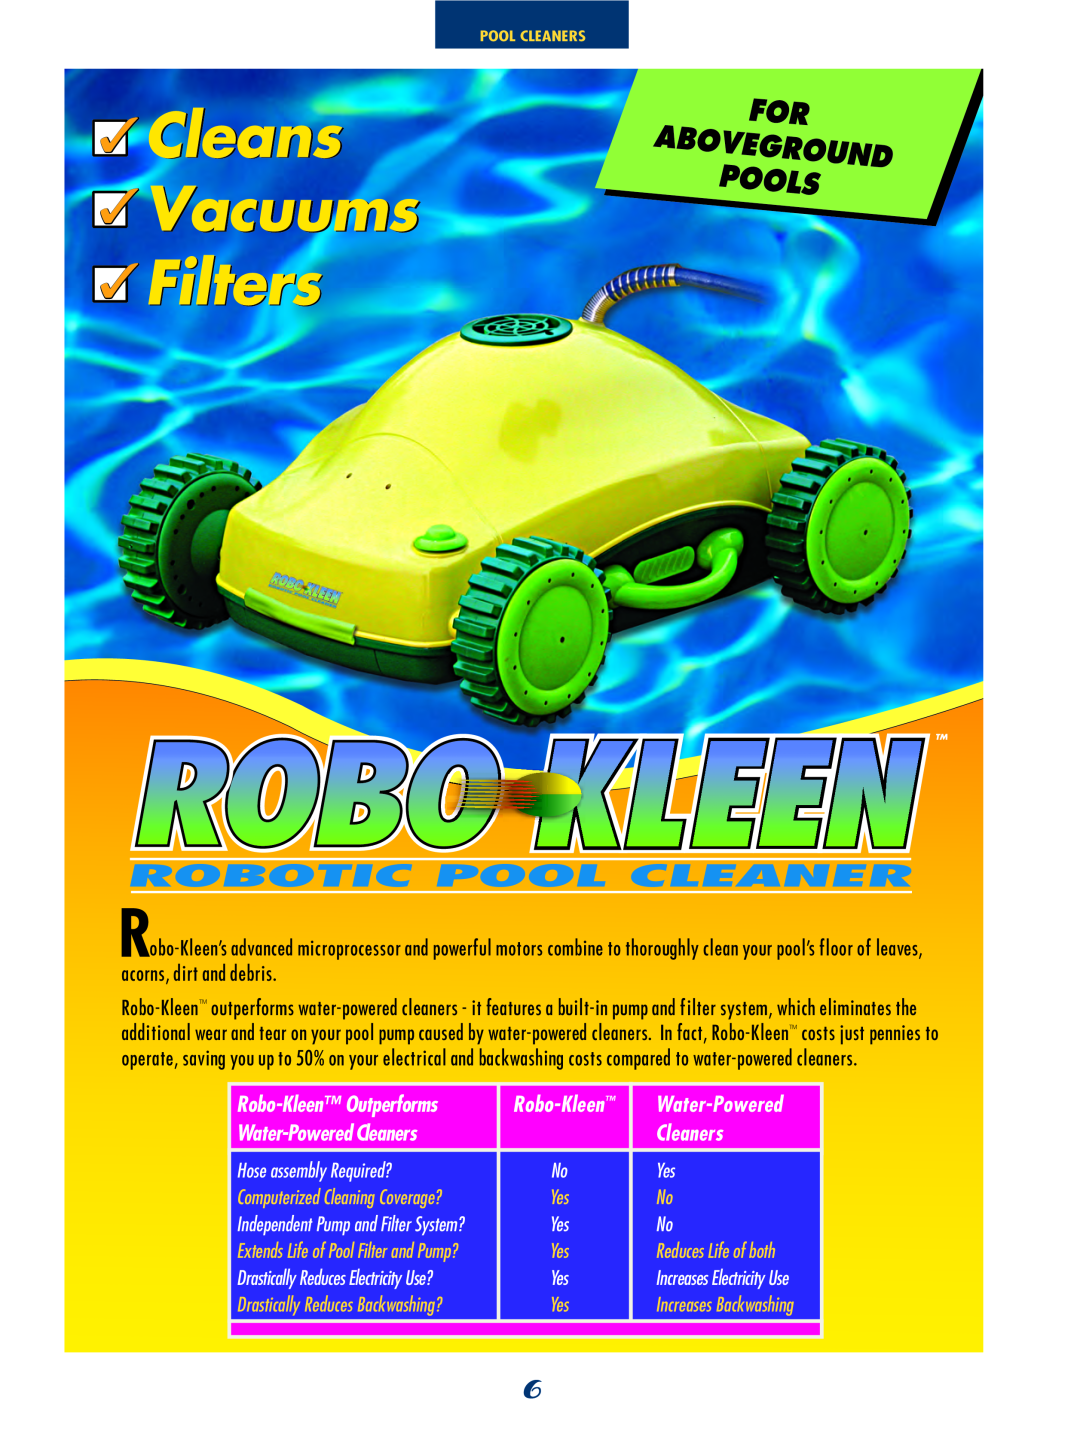 SmartPool Inc NC31 Robo-KleenOutperforms, Hose assembly Required?, Reduces Life of both, Computerized Cleaning Coverage? 